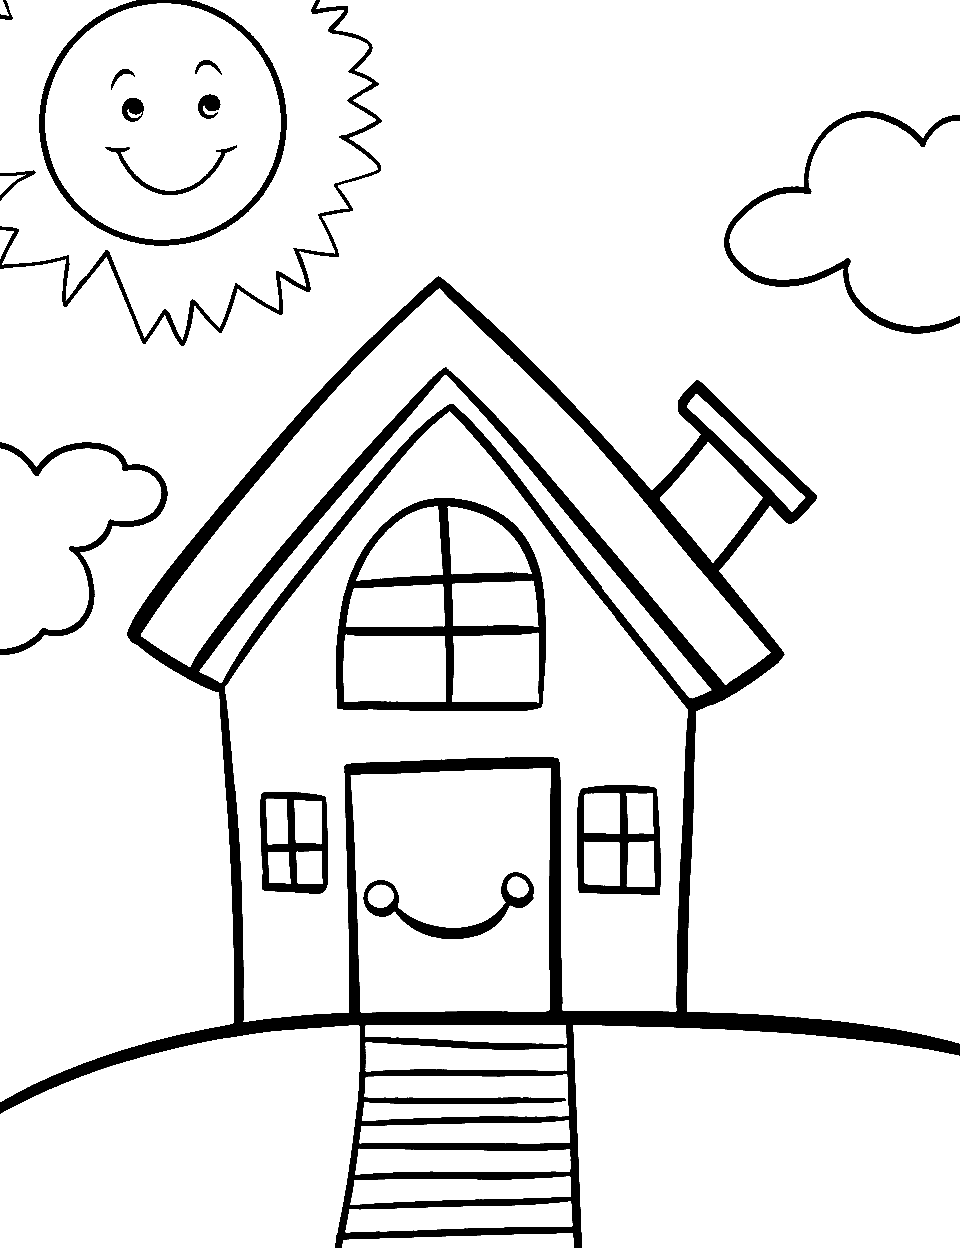 House Coloring Pages 13.webp